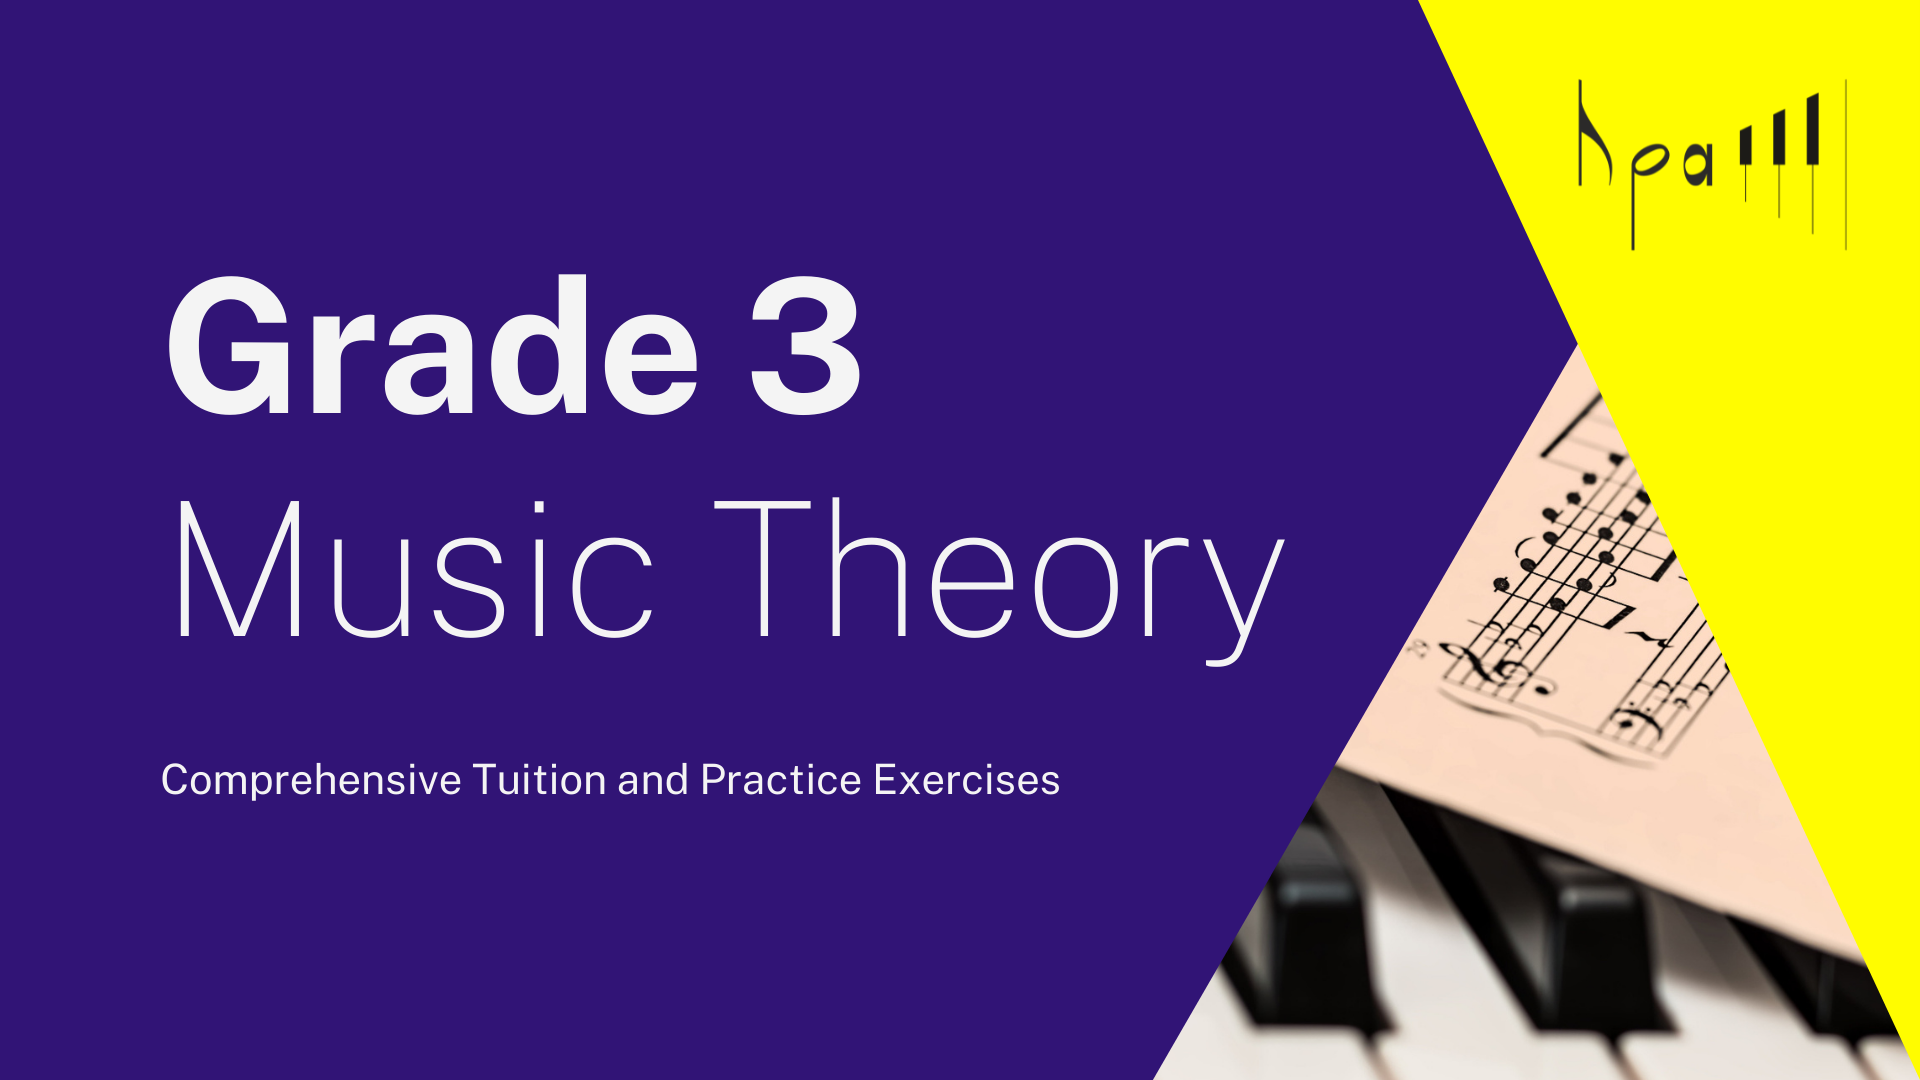 Grade 3 Music theory online course